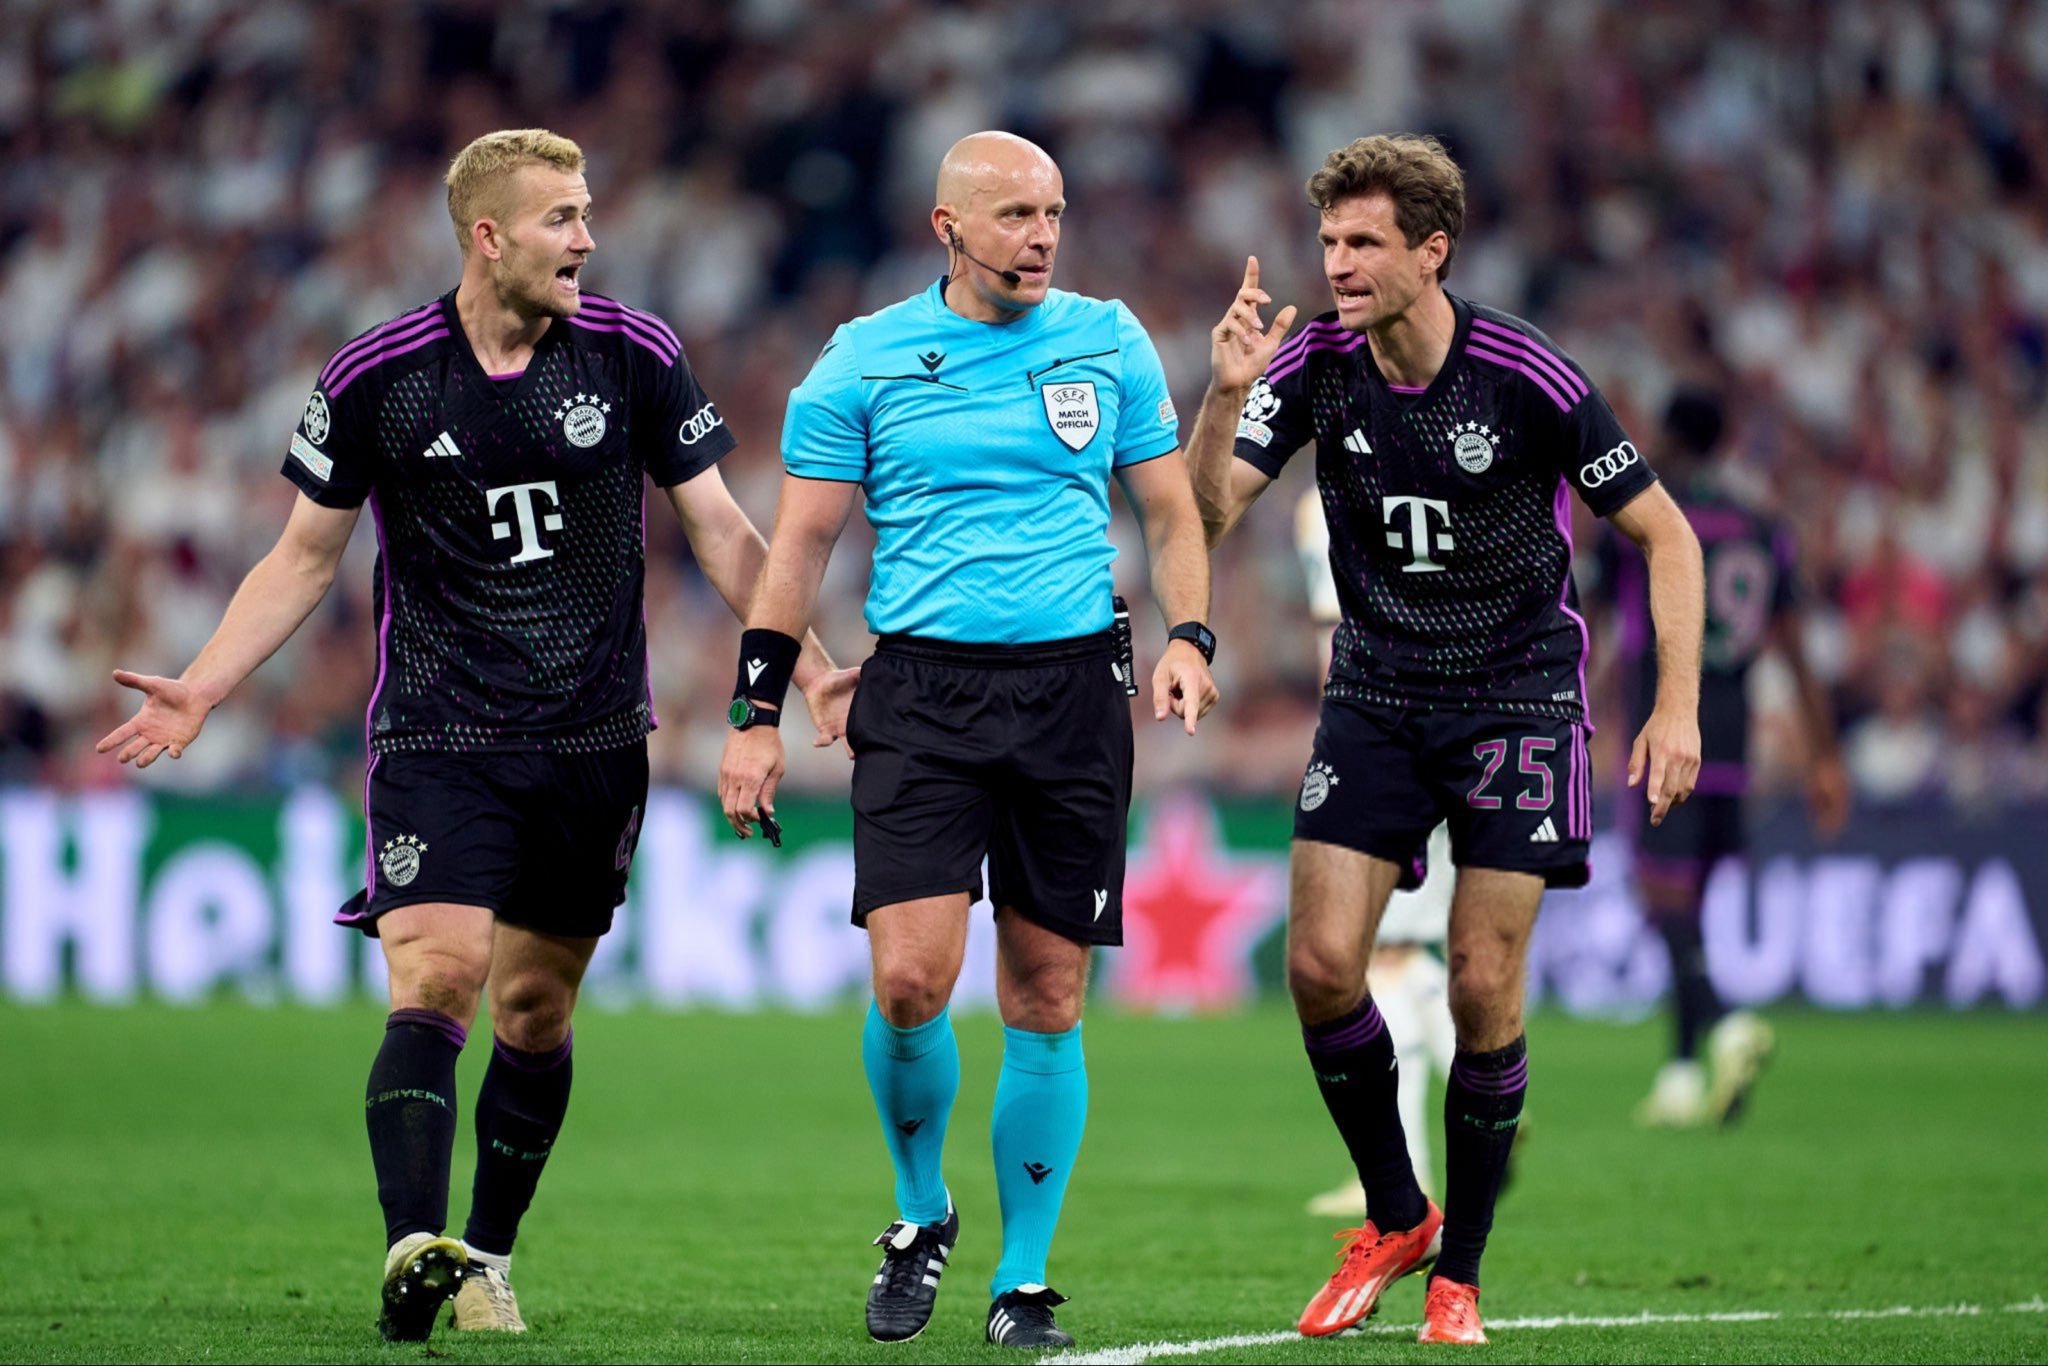 “It’s mismanagement” – Toni Kroos admits Real Madrid benefitted from refereeing error against Bayern Munich